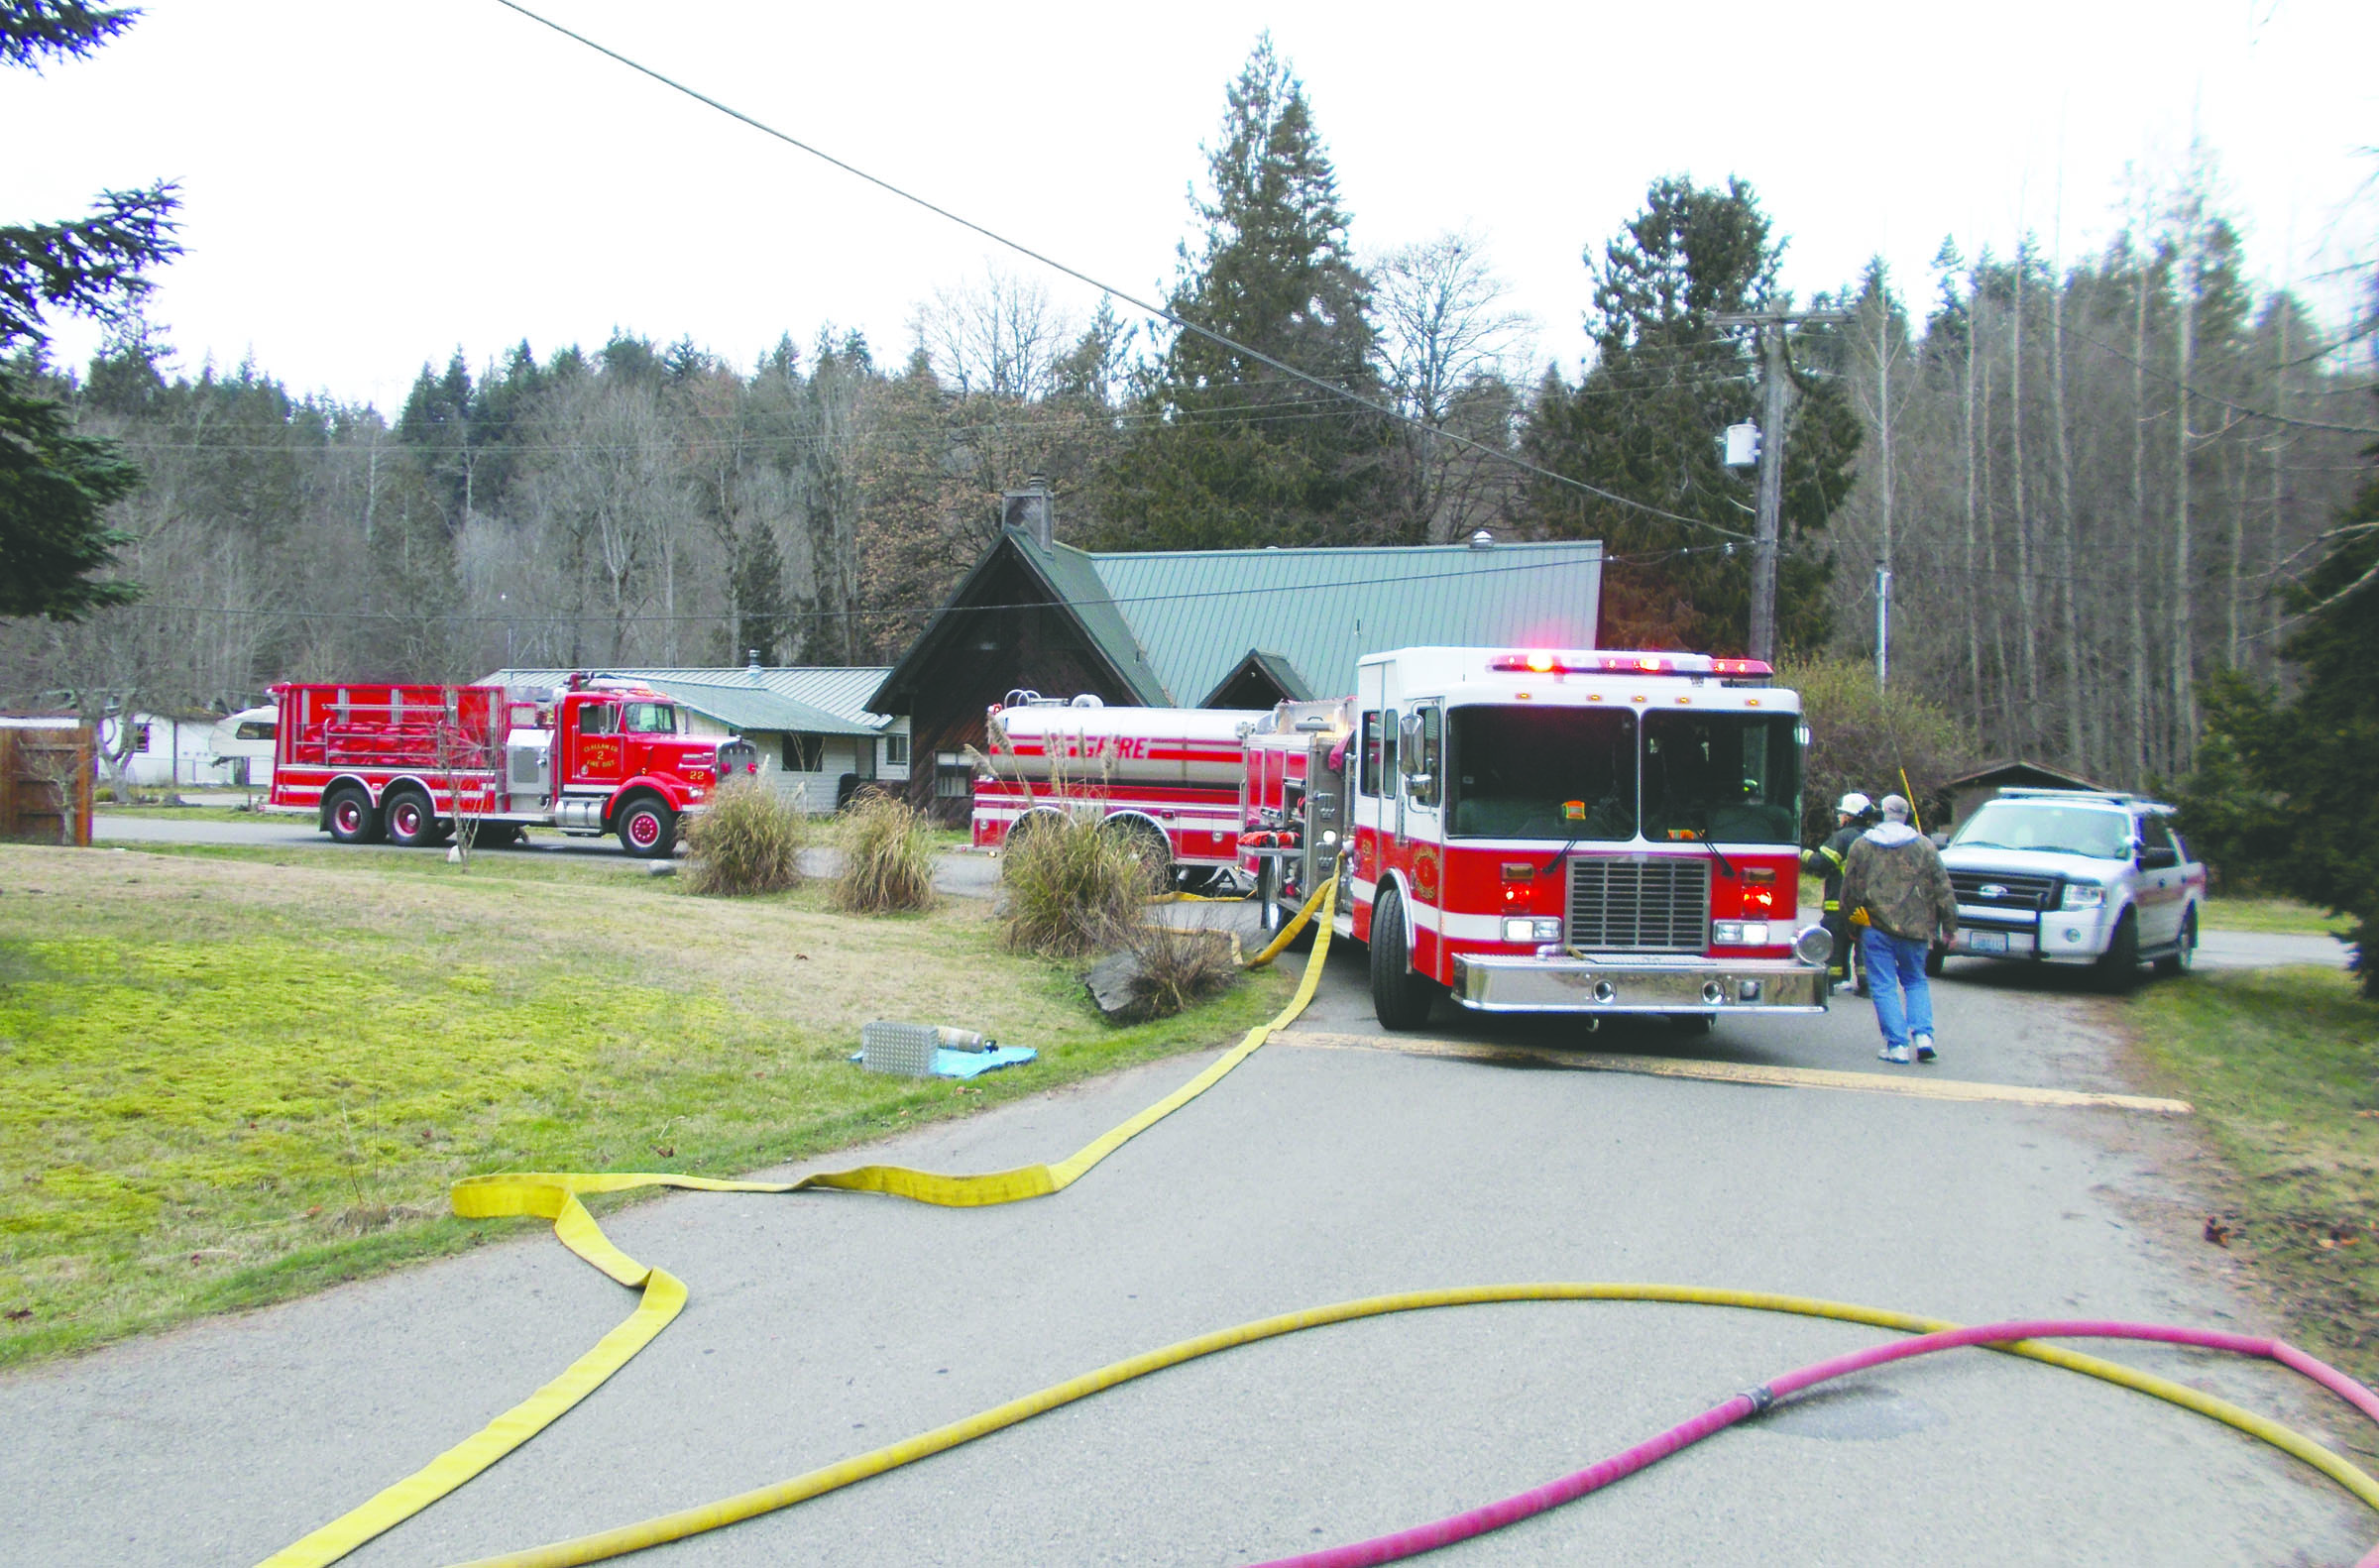 Units from Clallam County Fire District No. 2 respond to a structure fire on Rosewood Lane east of Port Angeles on Saturday. The cause was determined to be an electrical component in a TV-entertainment center. Clallam County Fire District No. 2